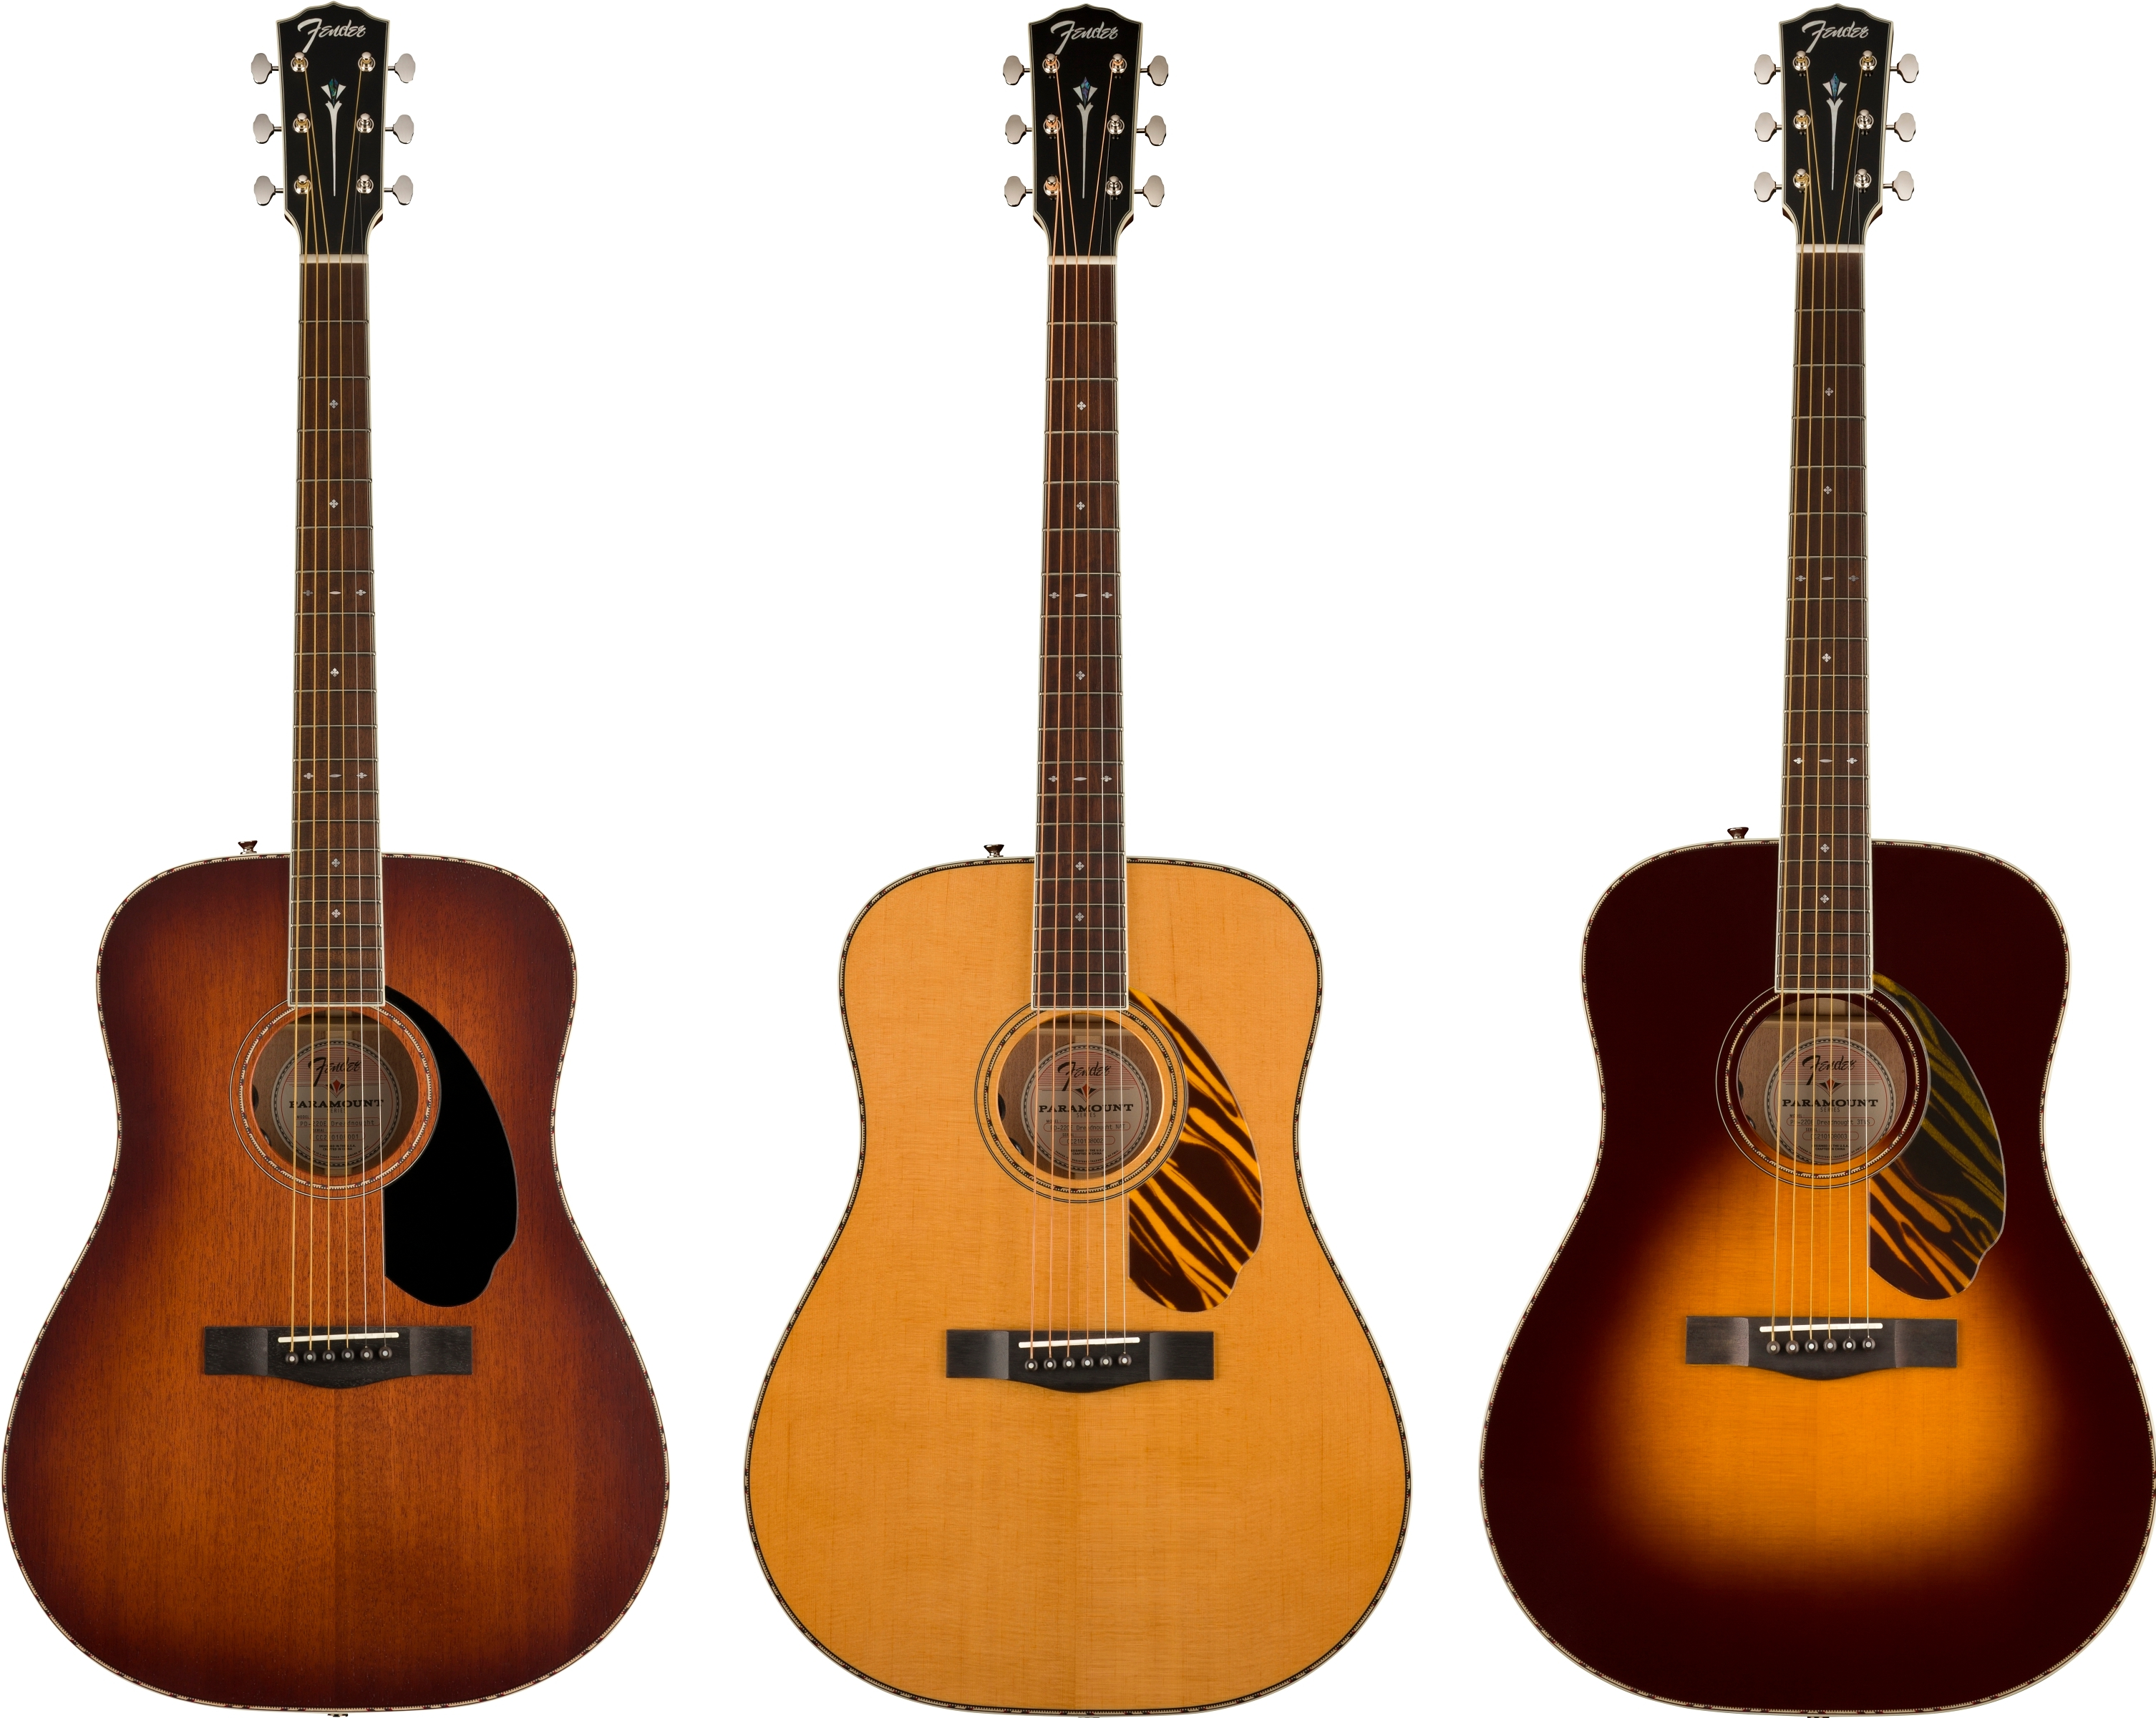 Fender PD-220E colors available